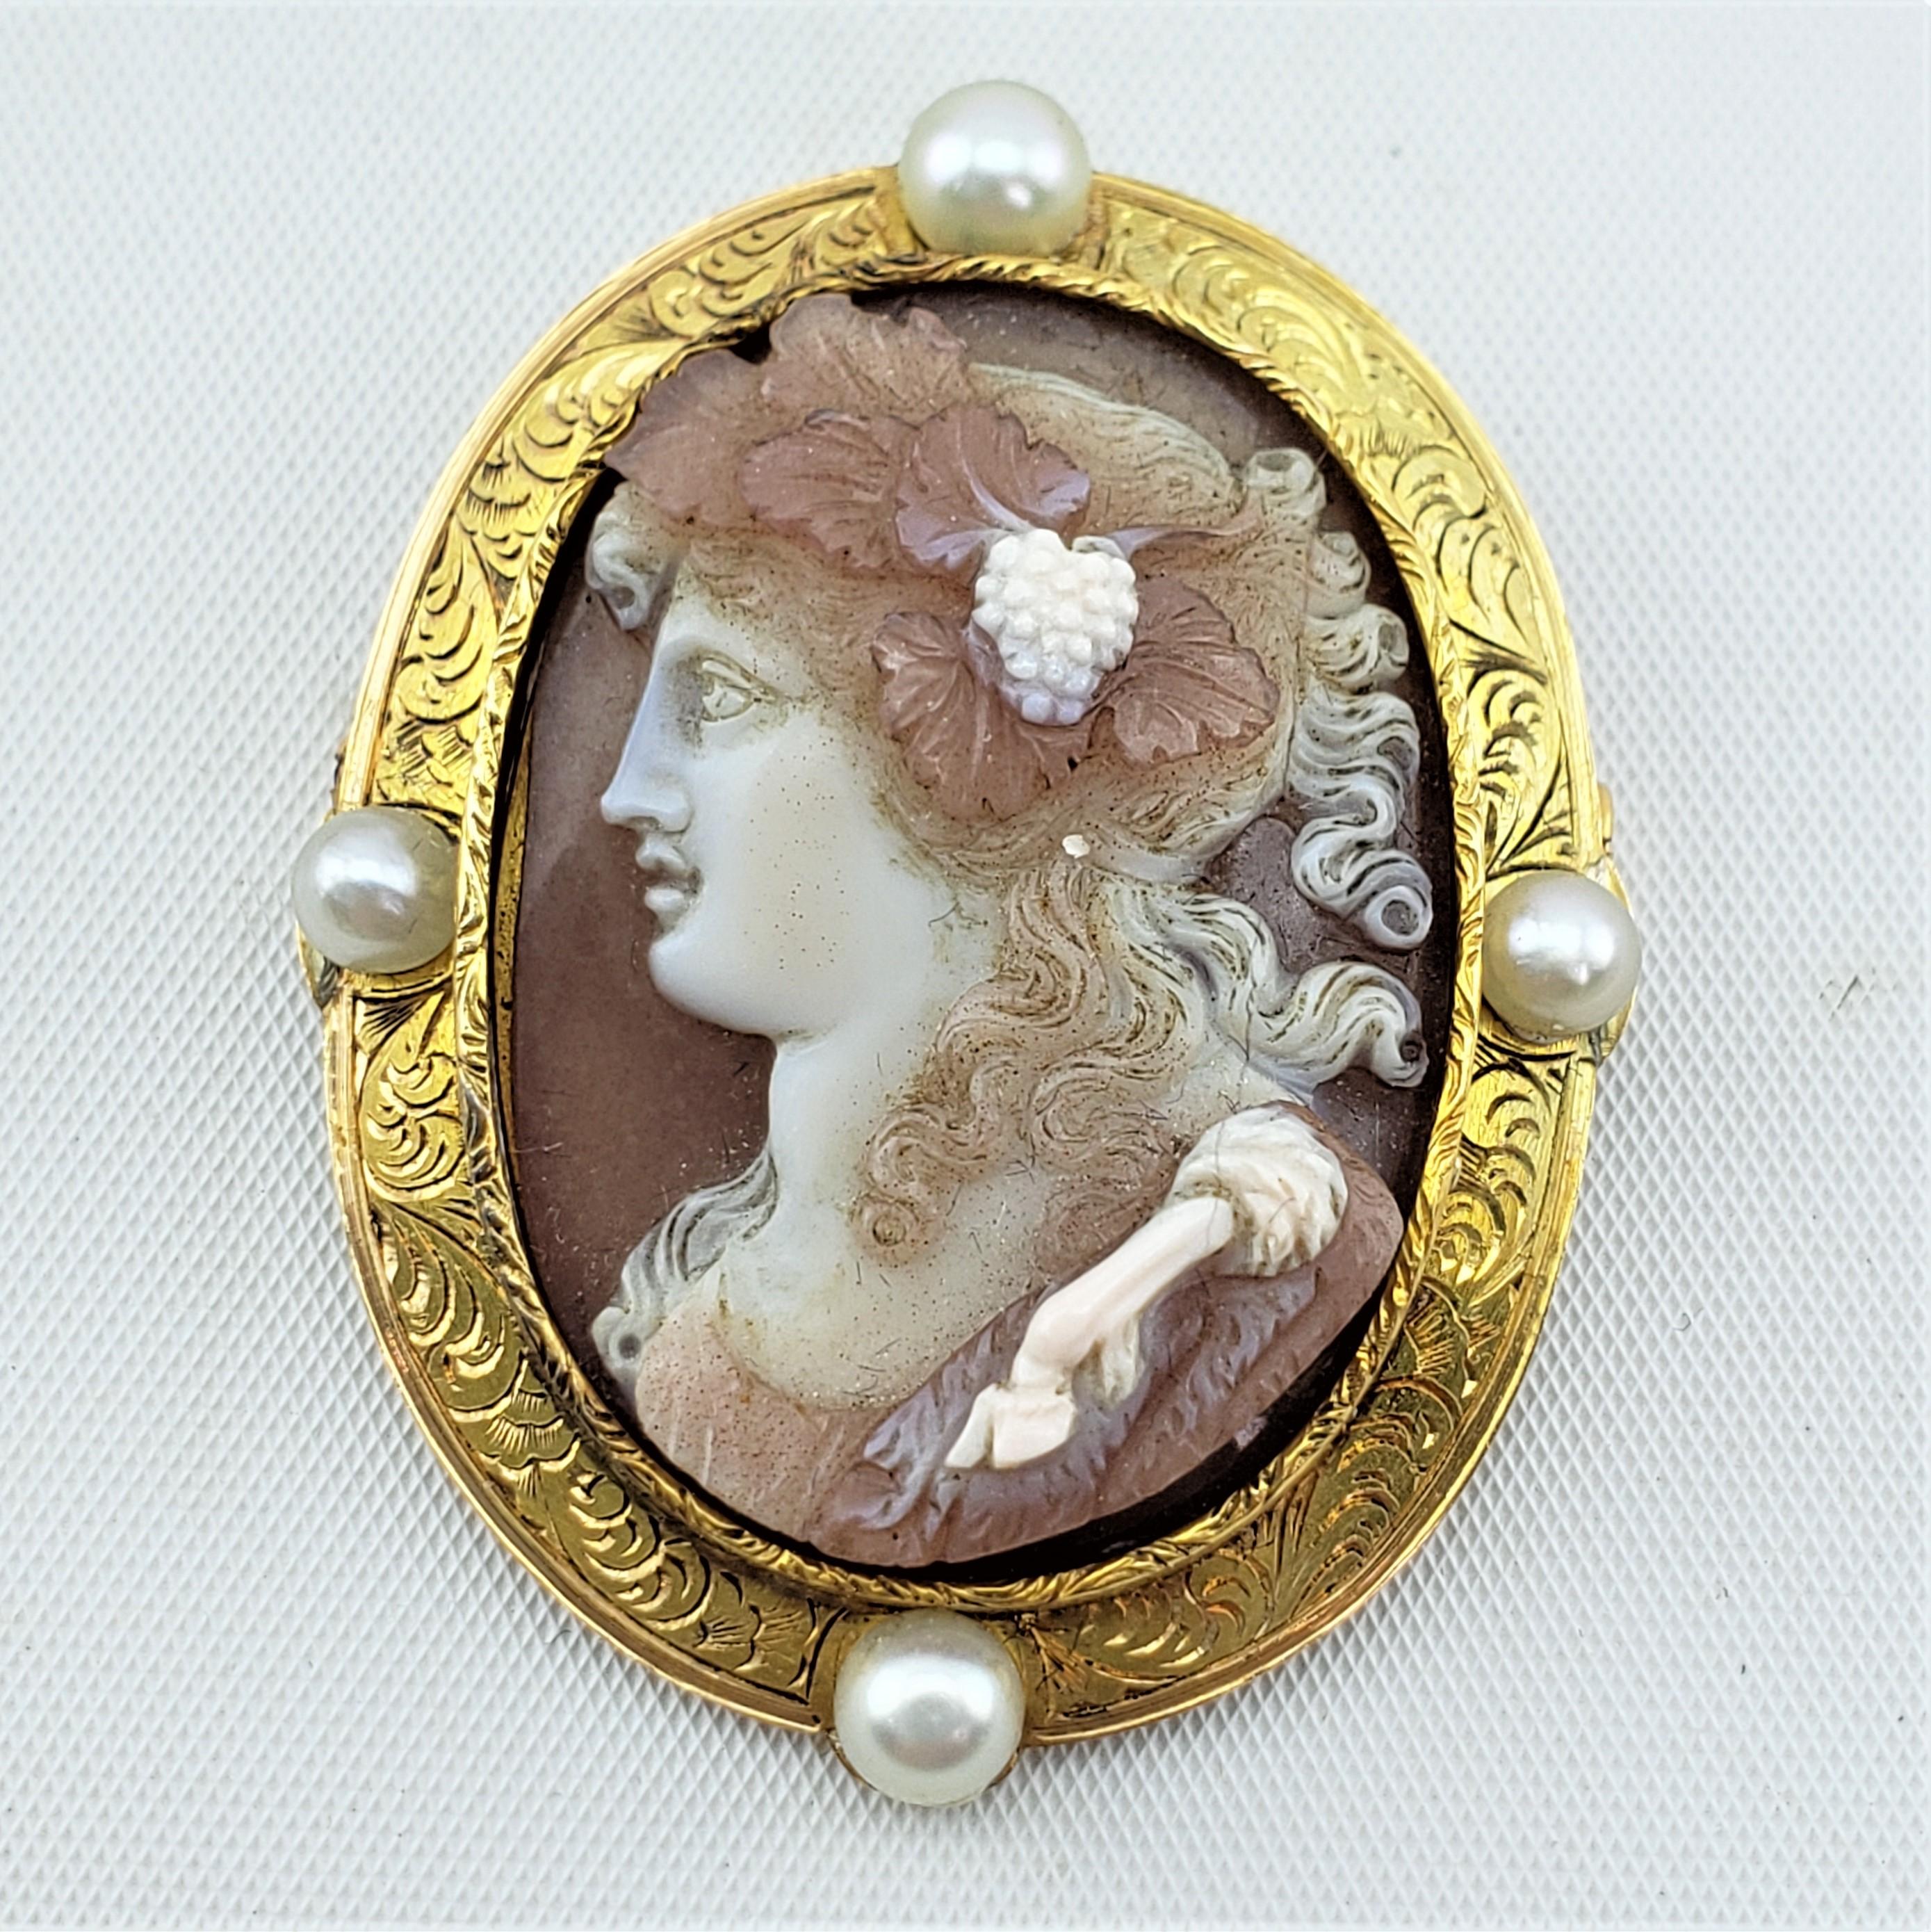 Renaissance Revival Antique 18 Karat Engraved Yellow Gold & Hand-Carved Hardstone Cameo Brooch